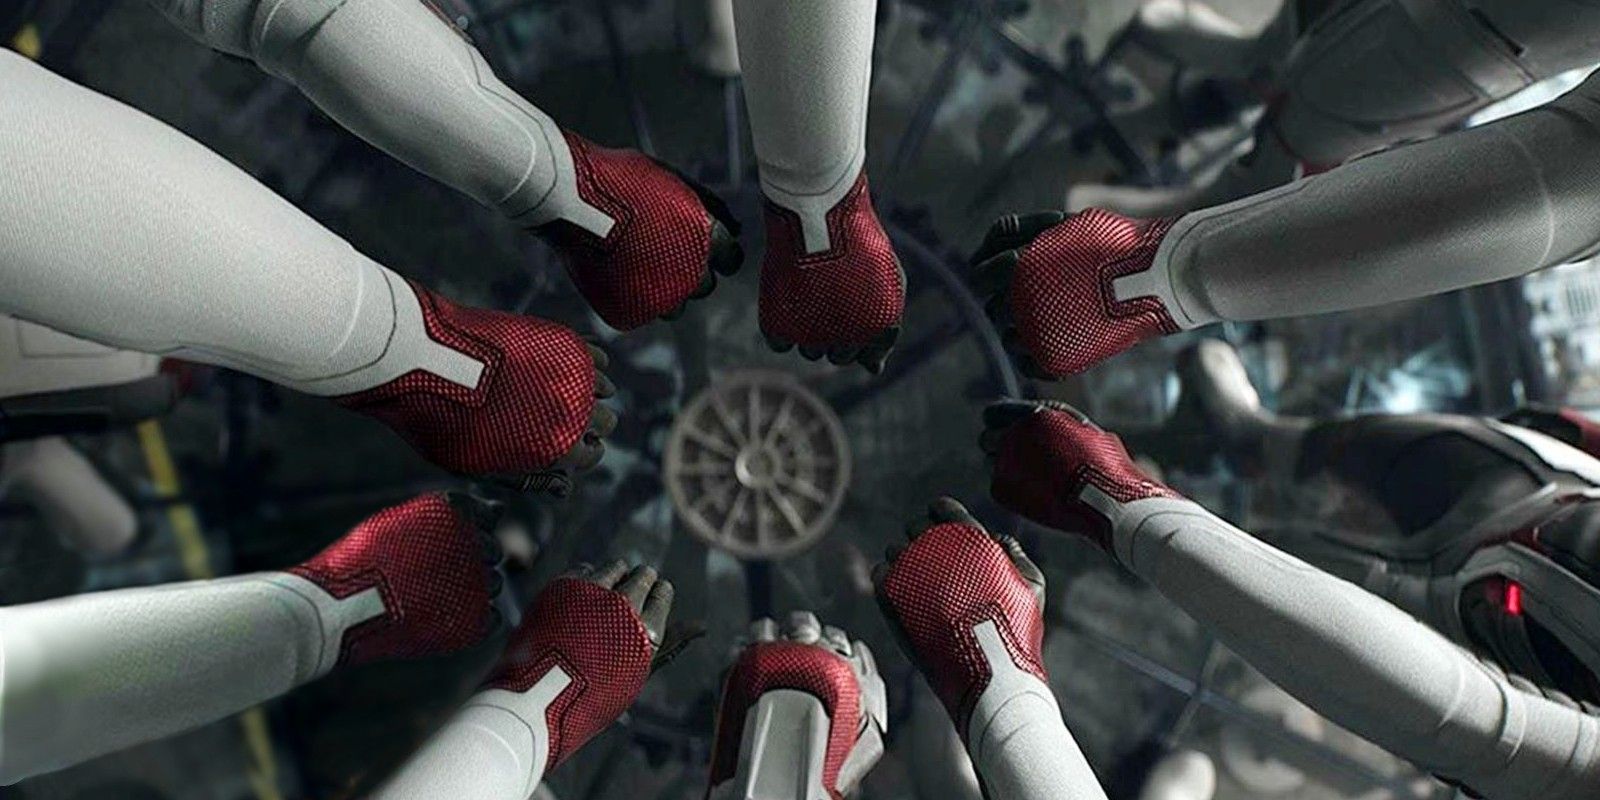 The Avengers put their hands together before time traveling